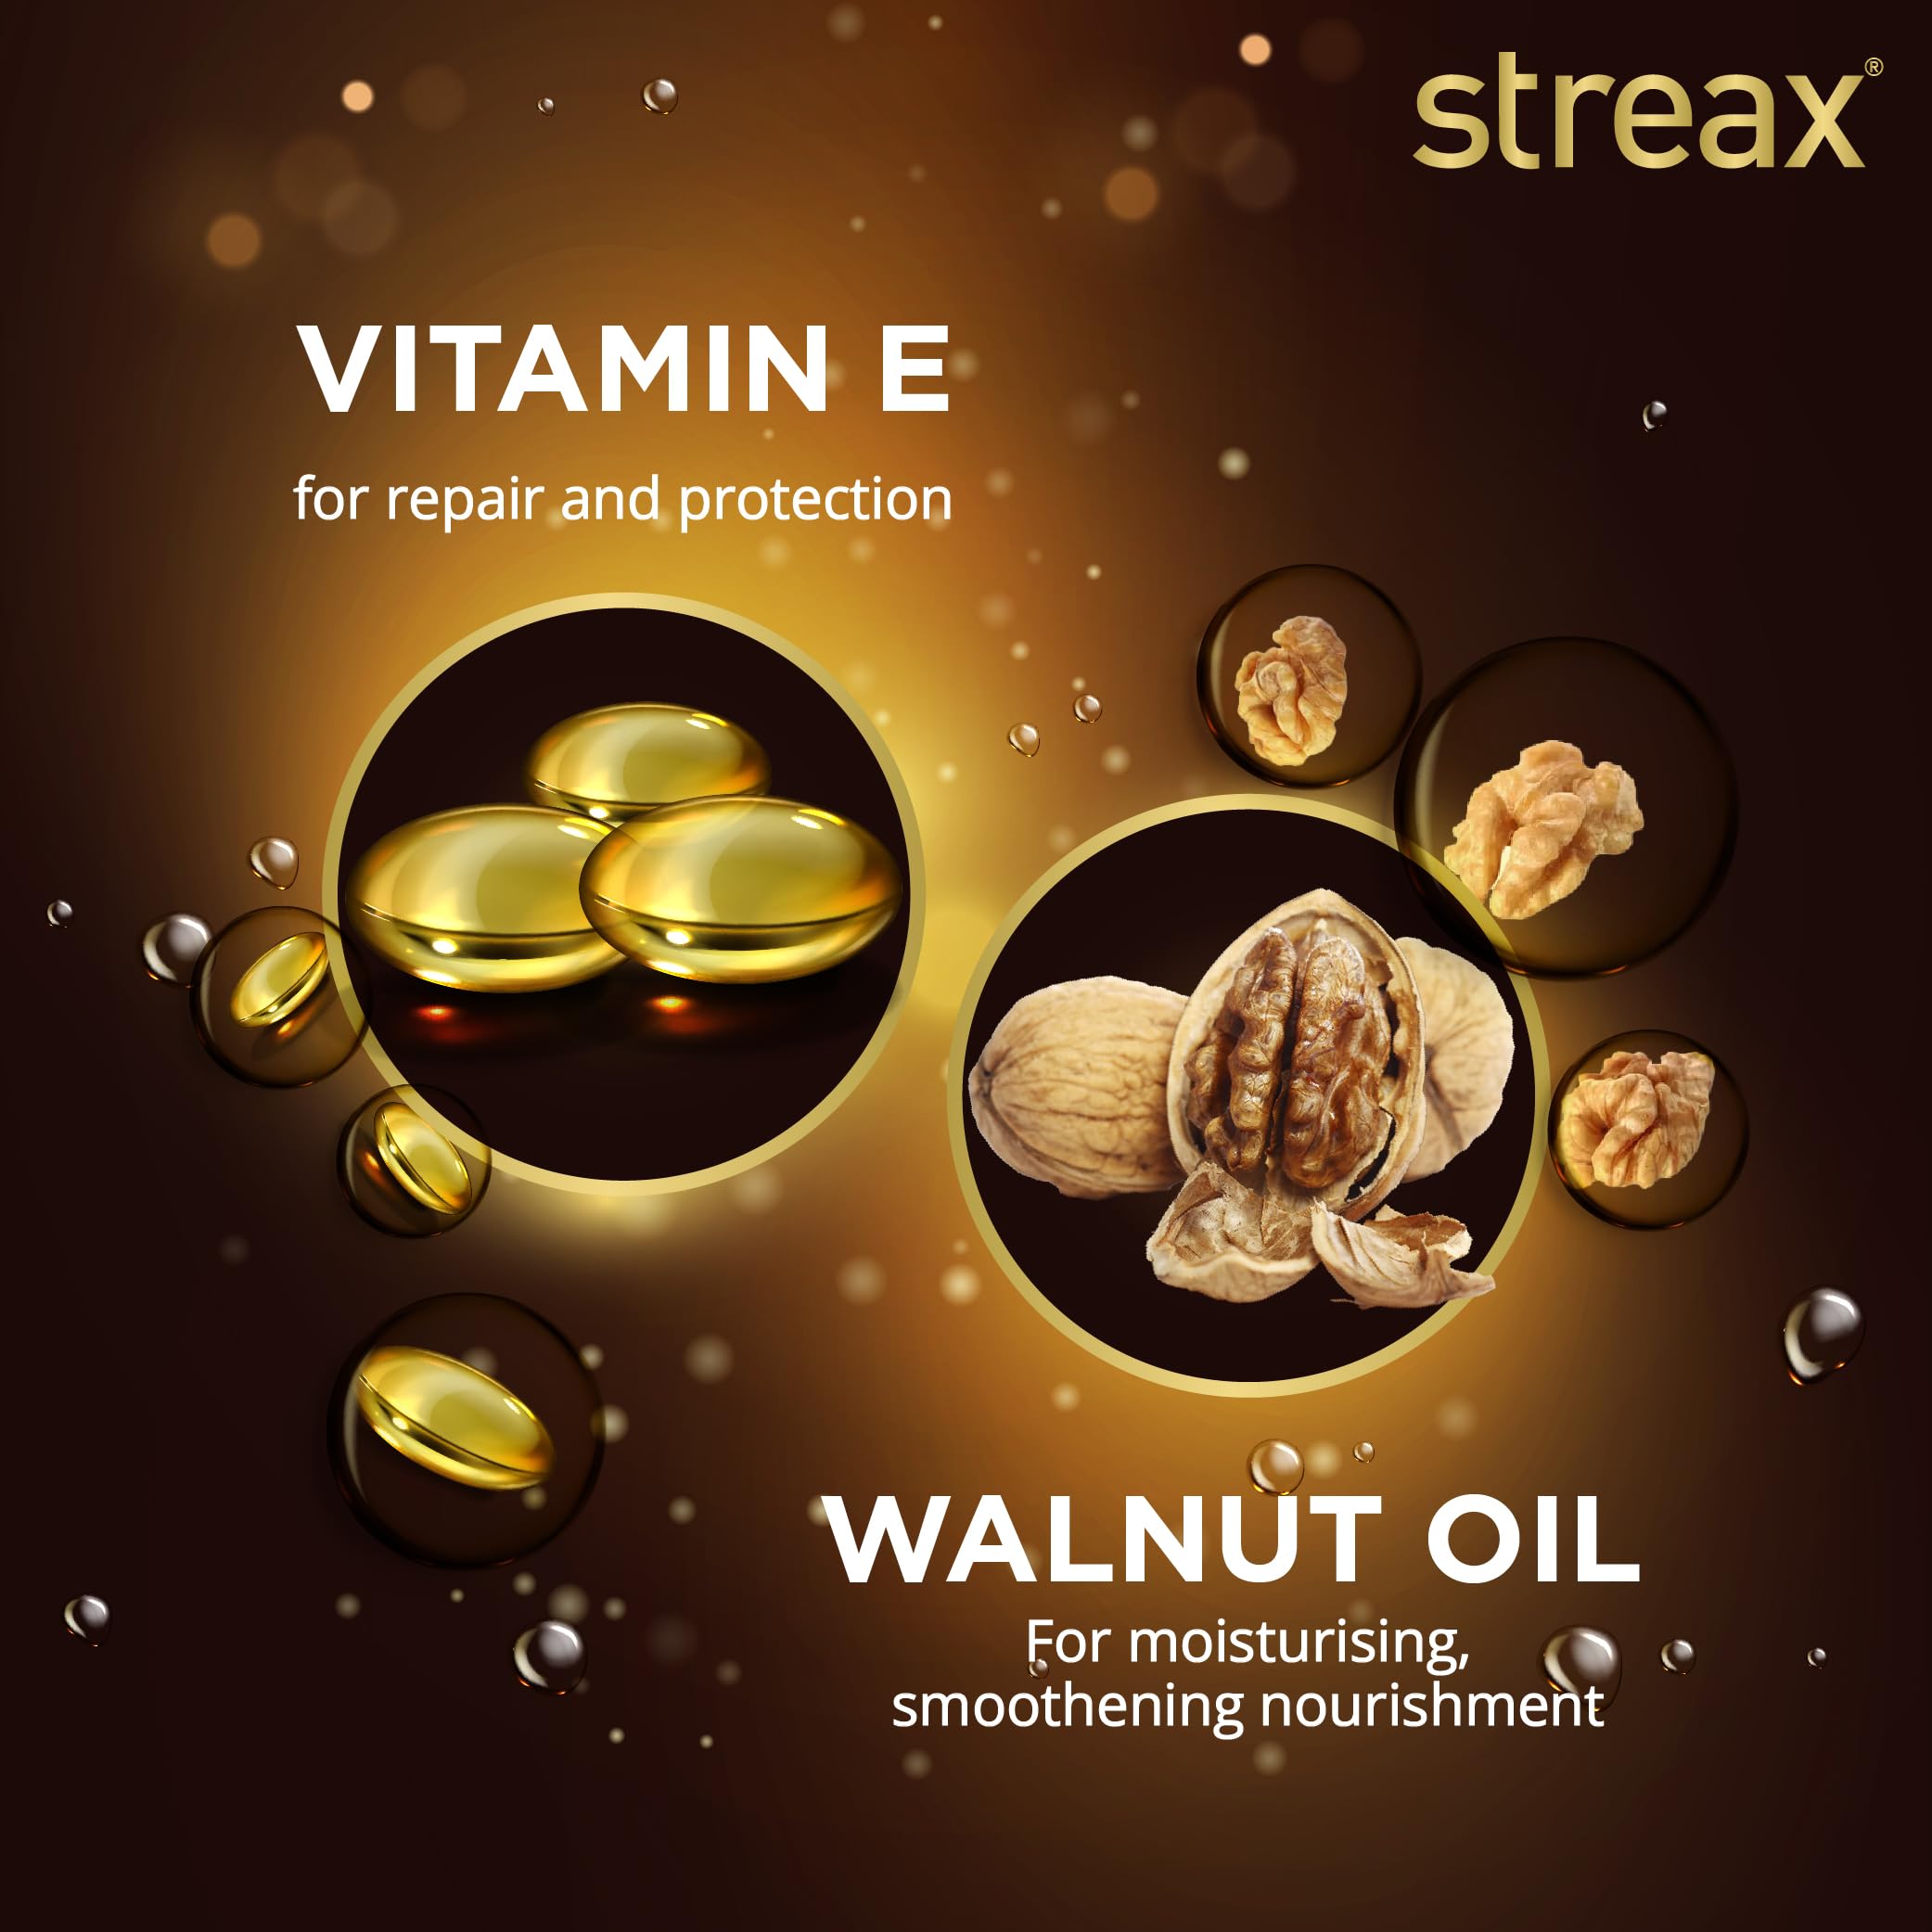 Streax Hair Serum 125ml, Vitalized with Walnut Oil, For Hair Smoothening & Shine, For Dry & Frizzy Hair